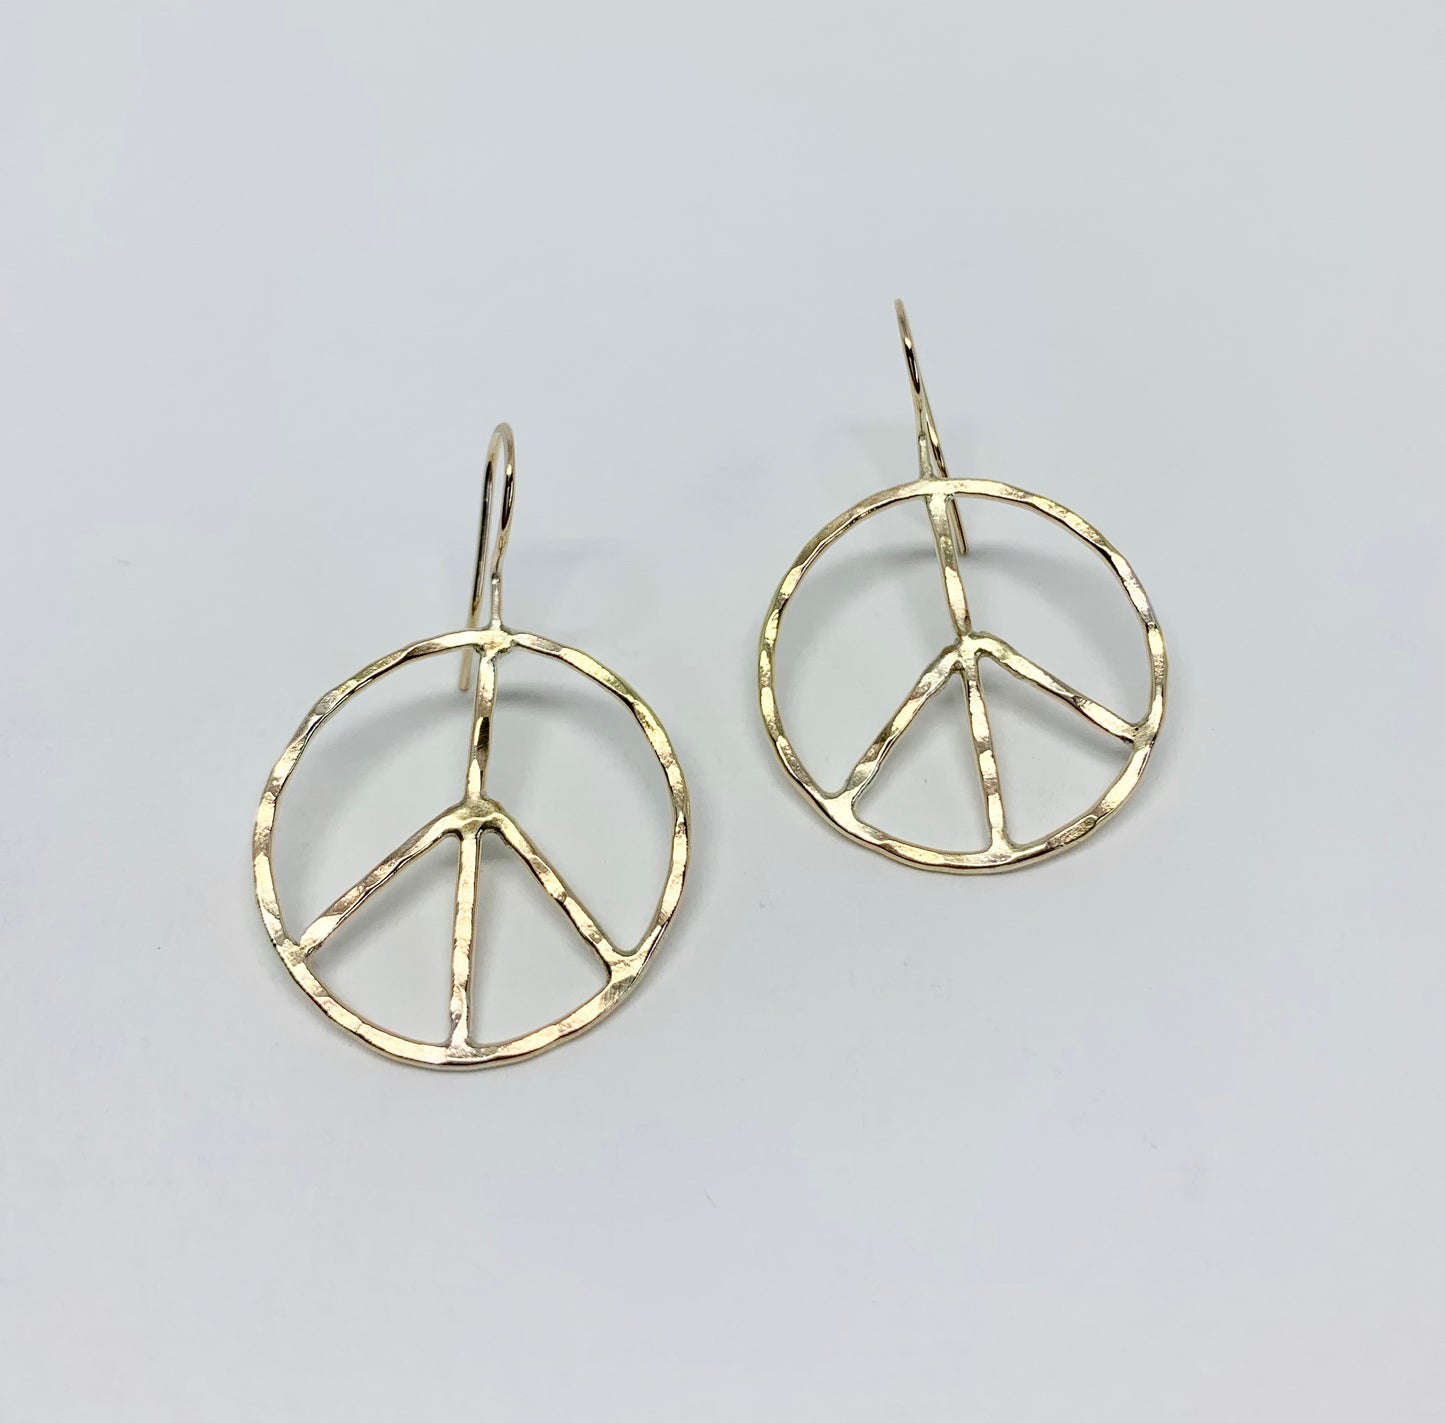 Rustic Peace Sign Earrings - Let There Be Peace Earrings - Small - Jennifer Cervelli Jewelry